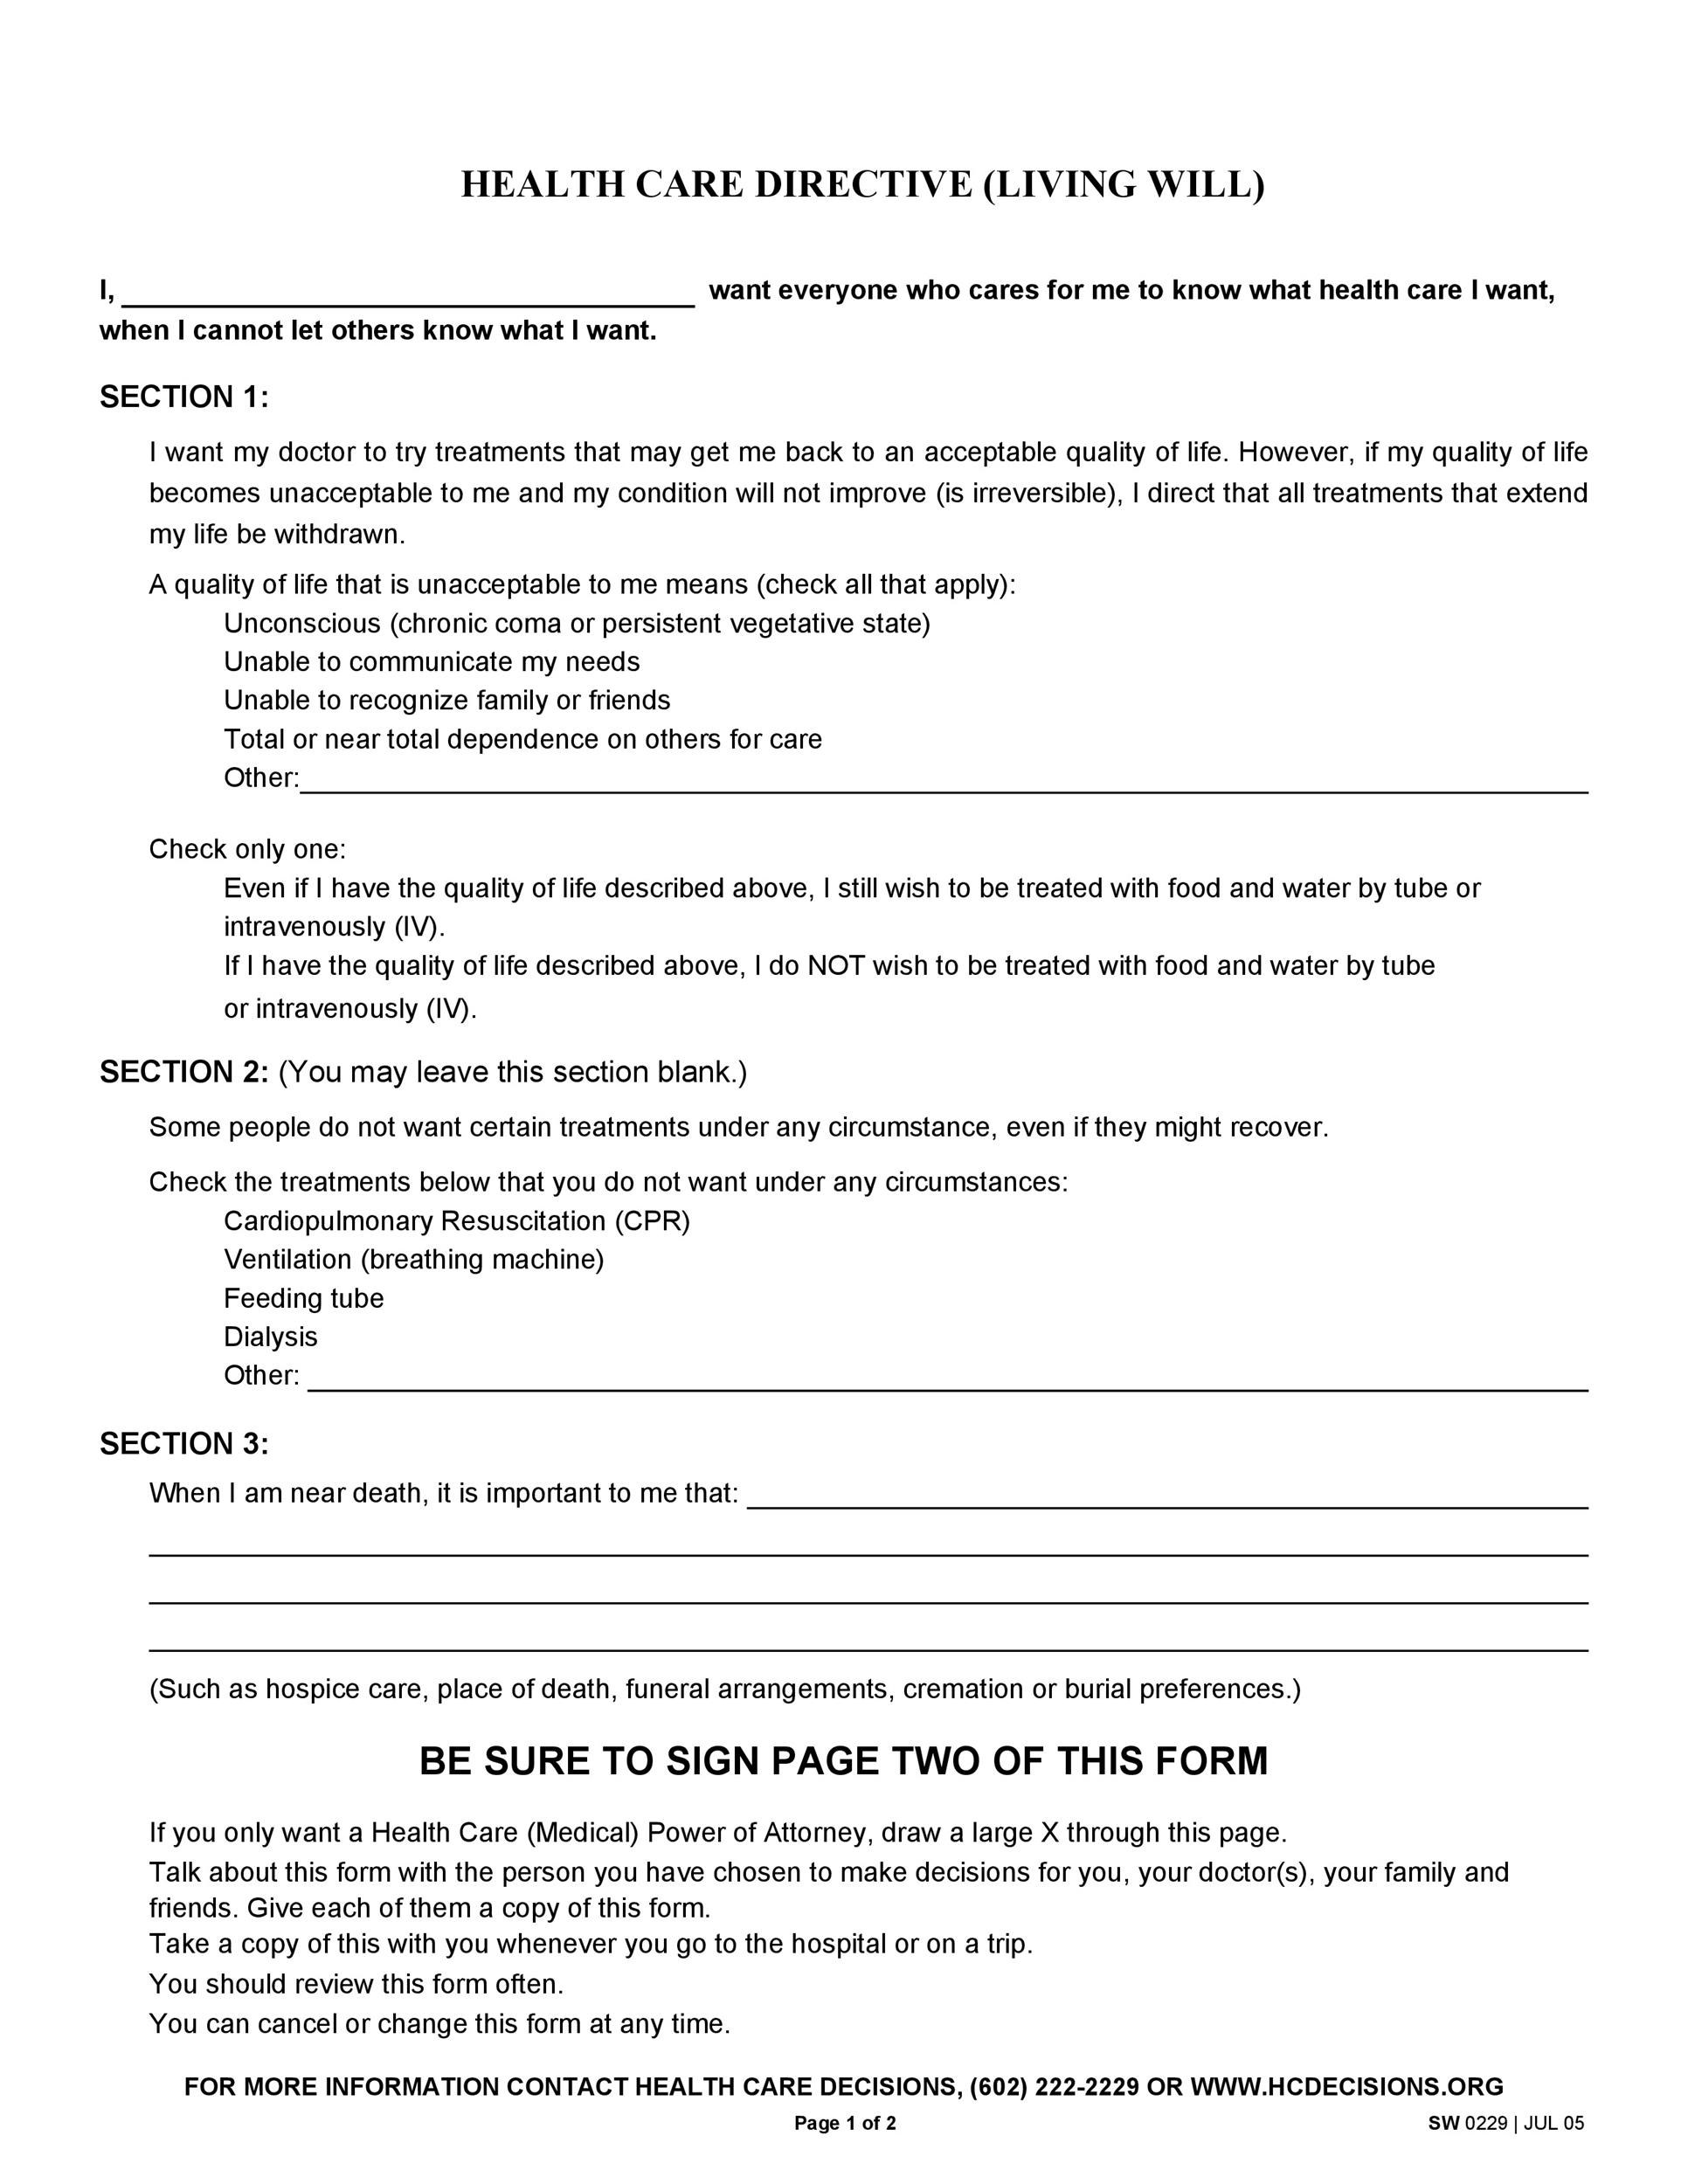 free-printable-living-will-forms-for-pa-printable-forms-free-online